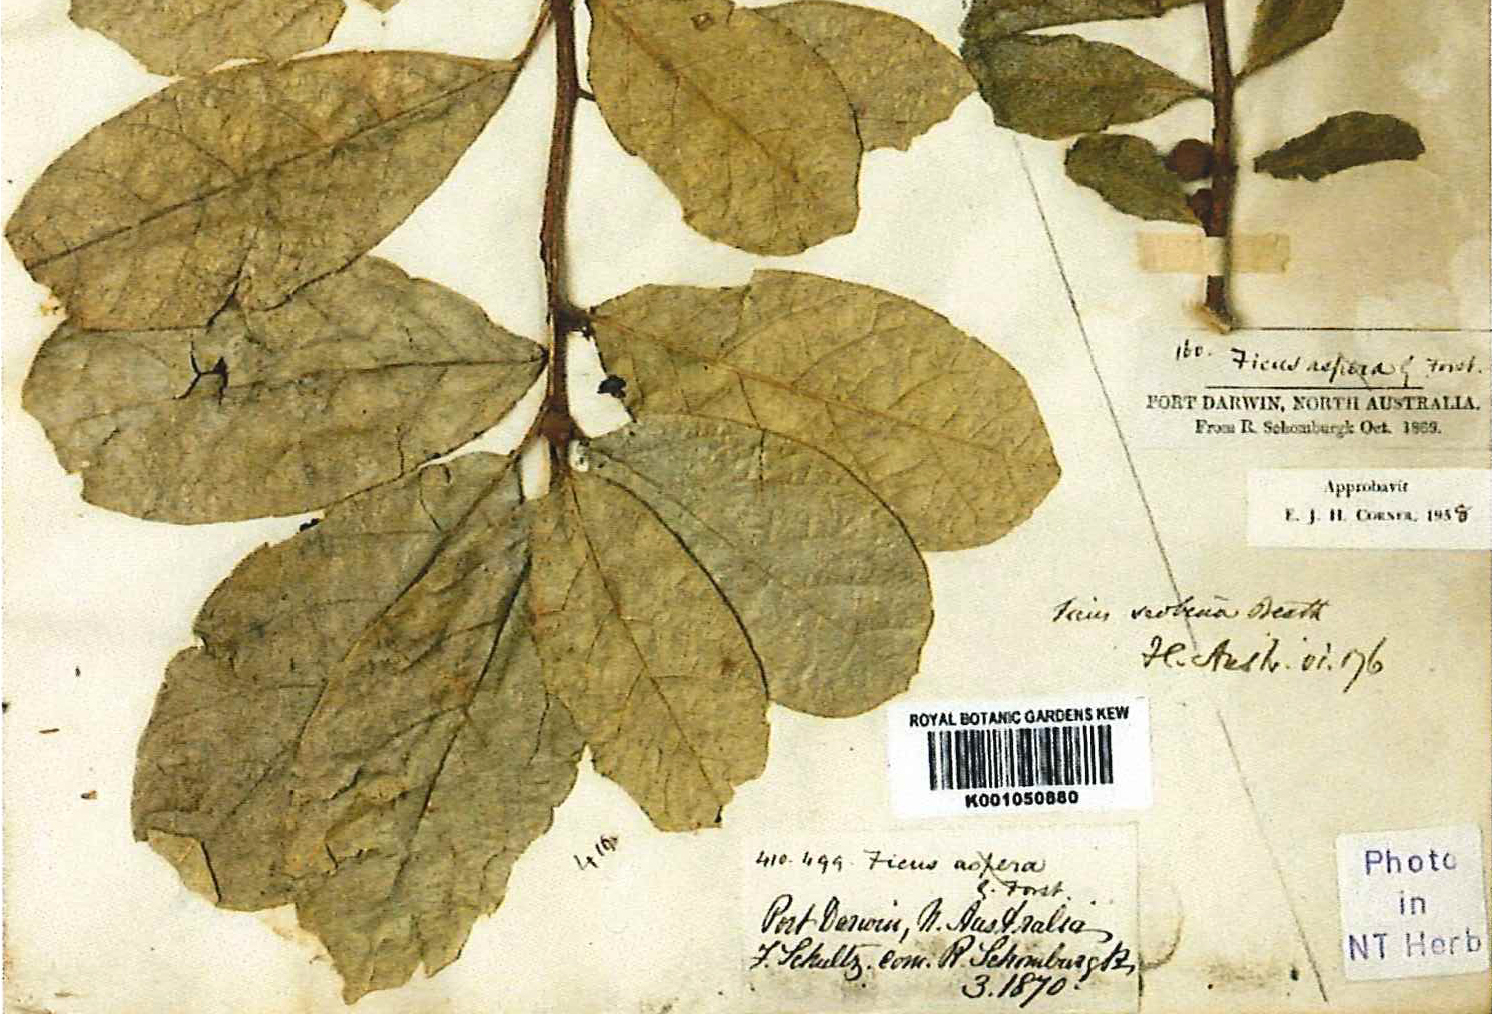 Photograph of plant specimens collected by Fredrick Schultze